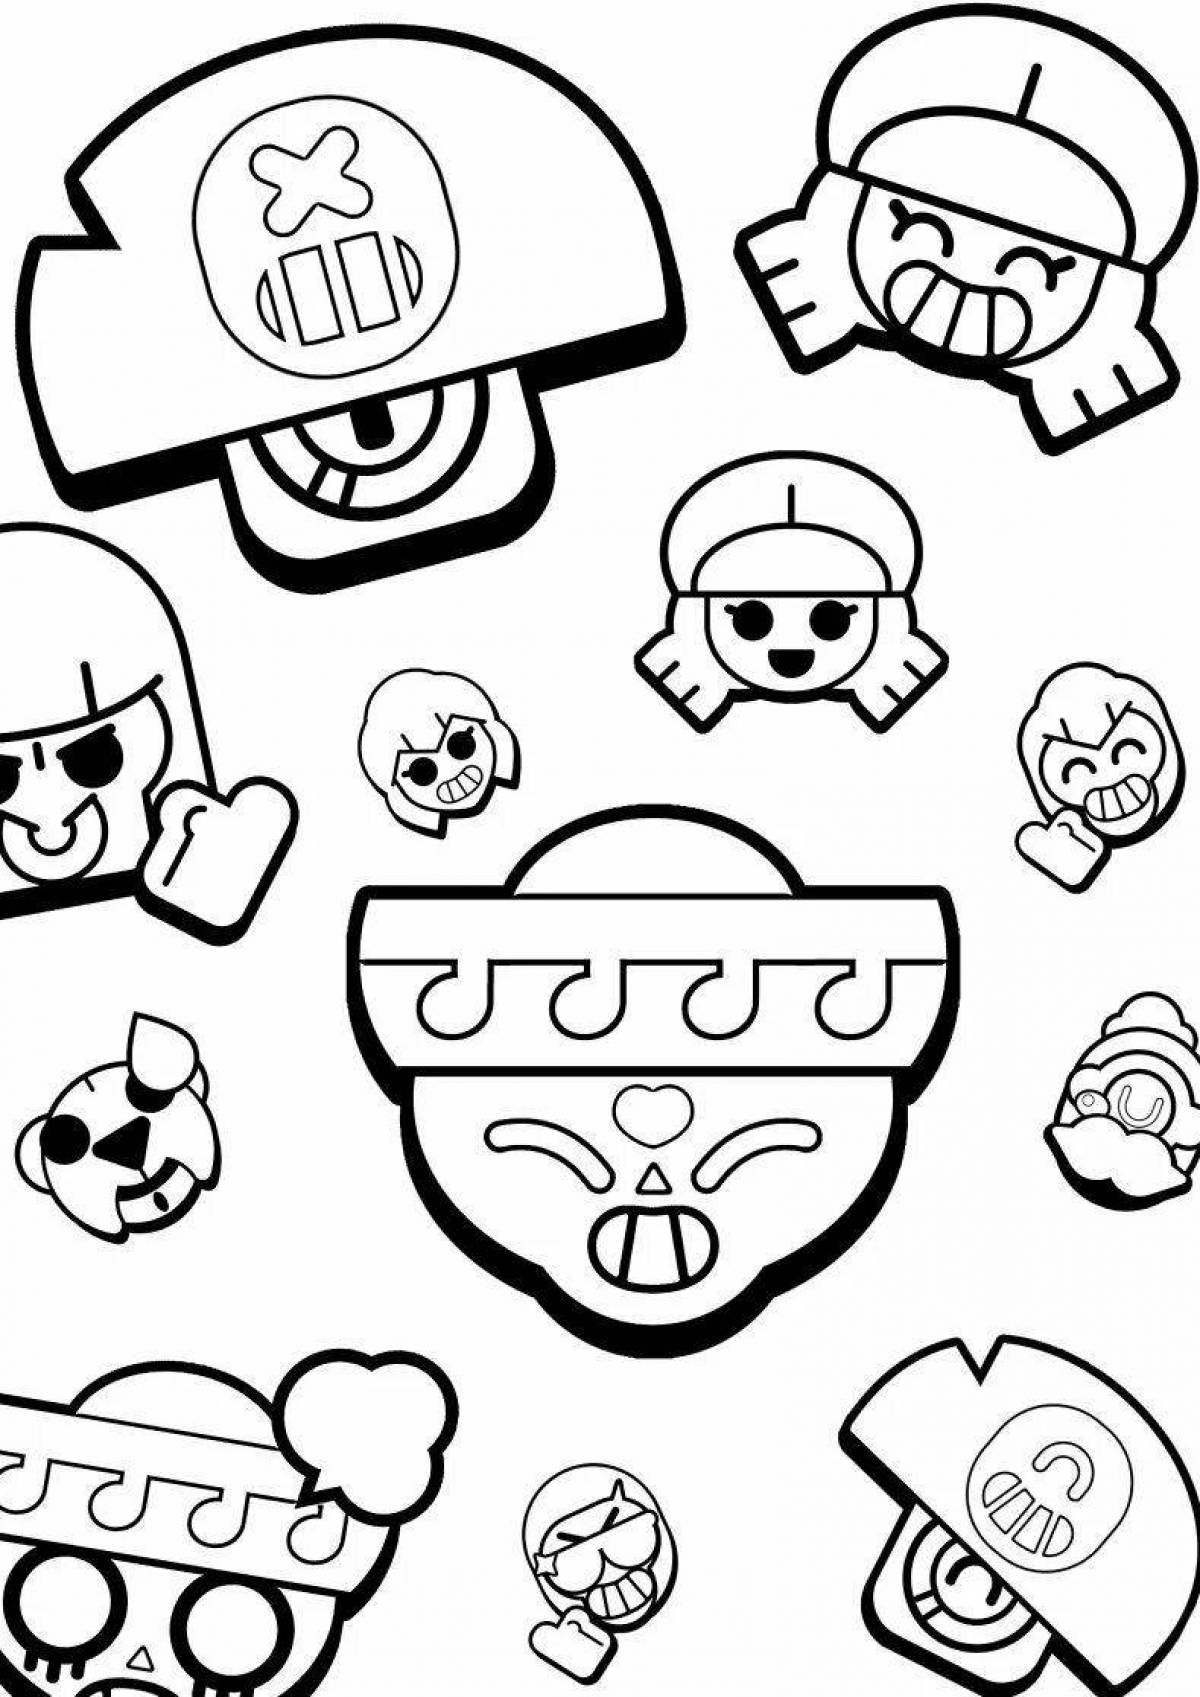 Sparkle coloring page icons from brawl stars